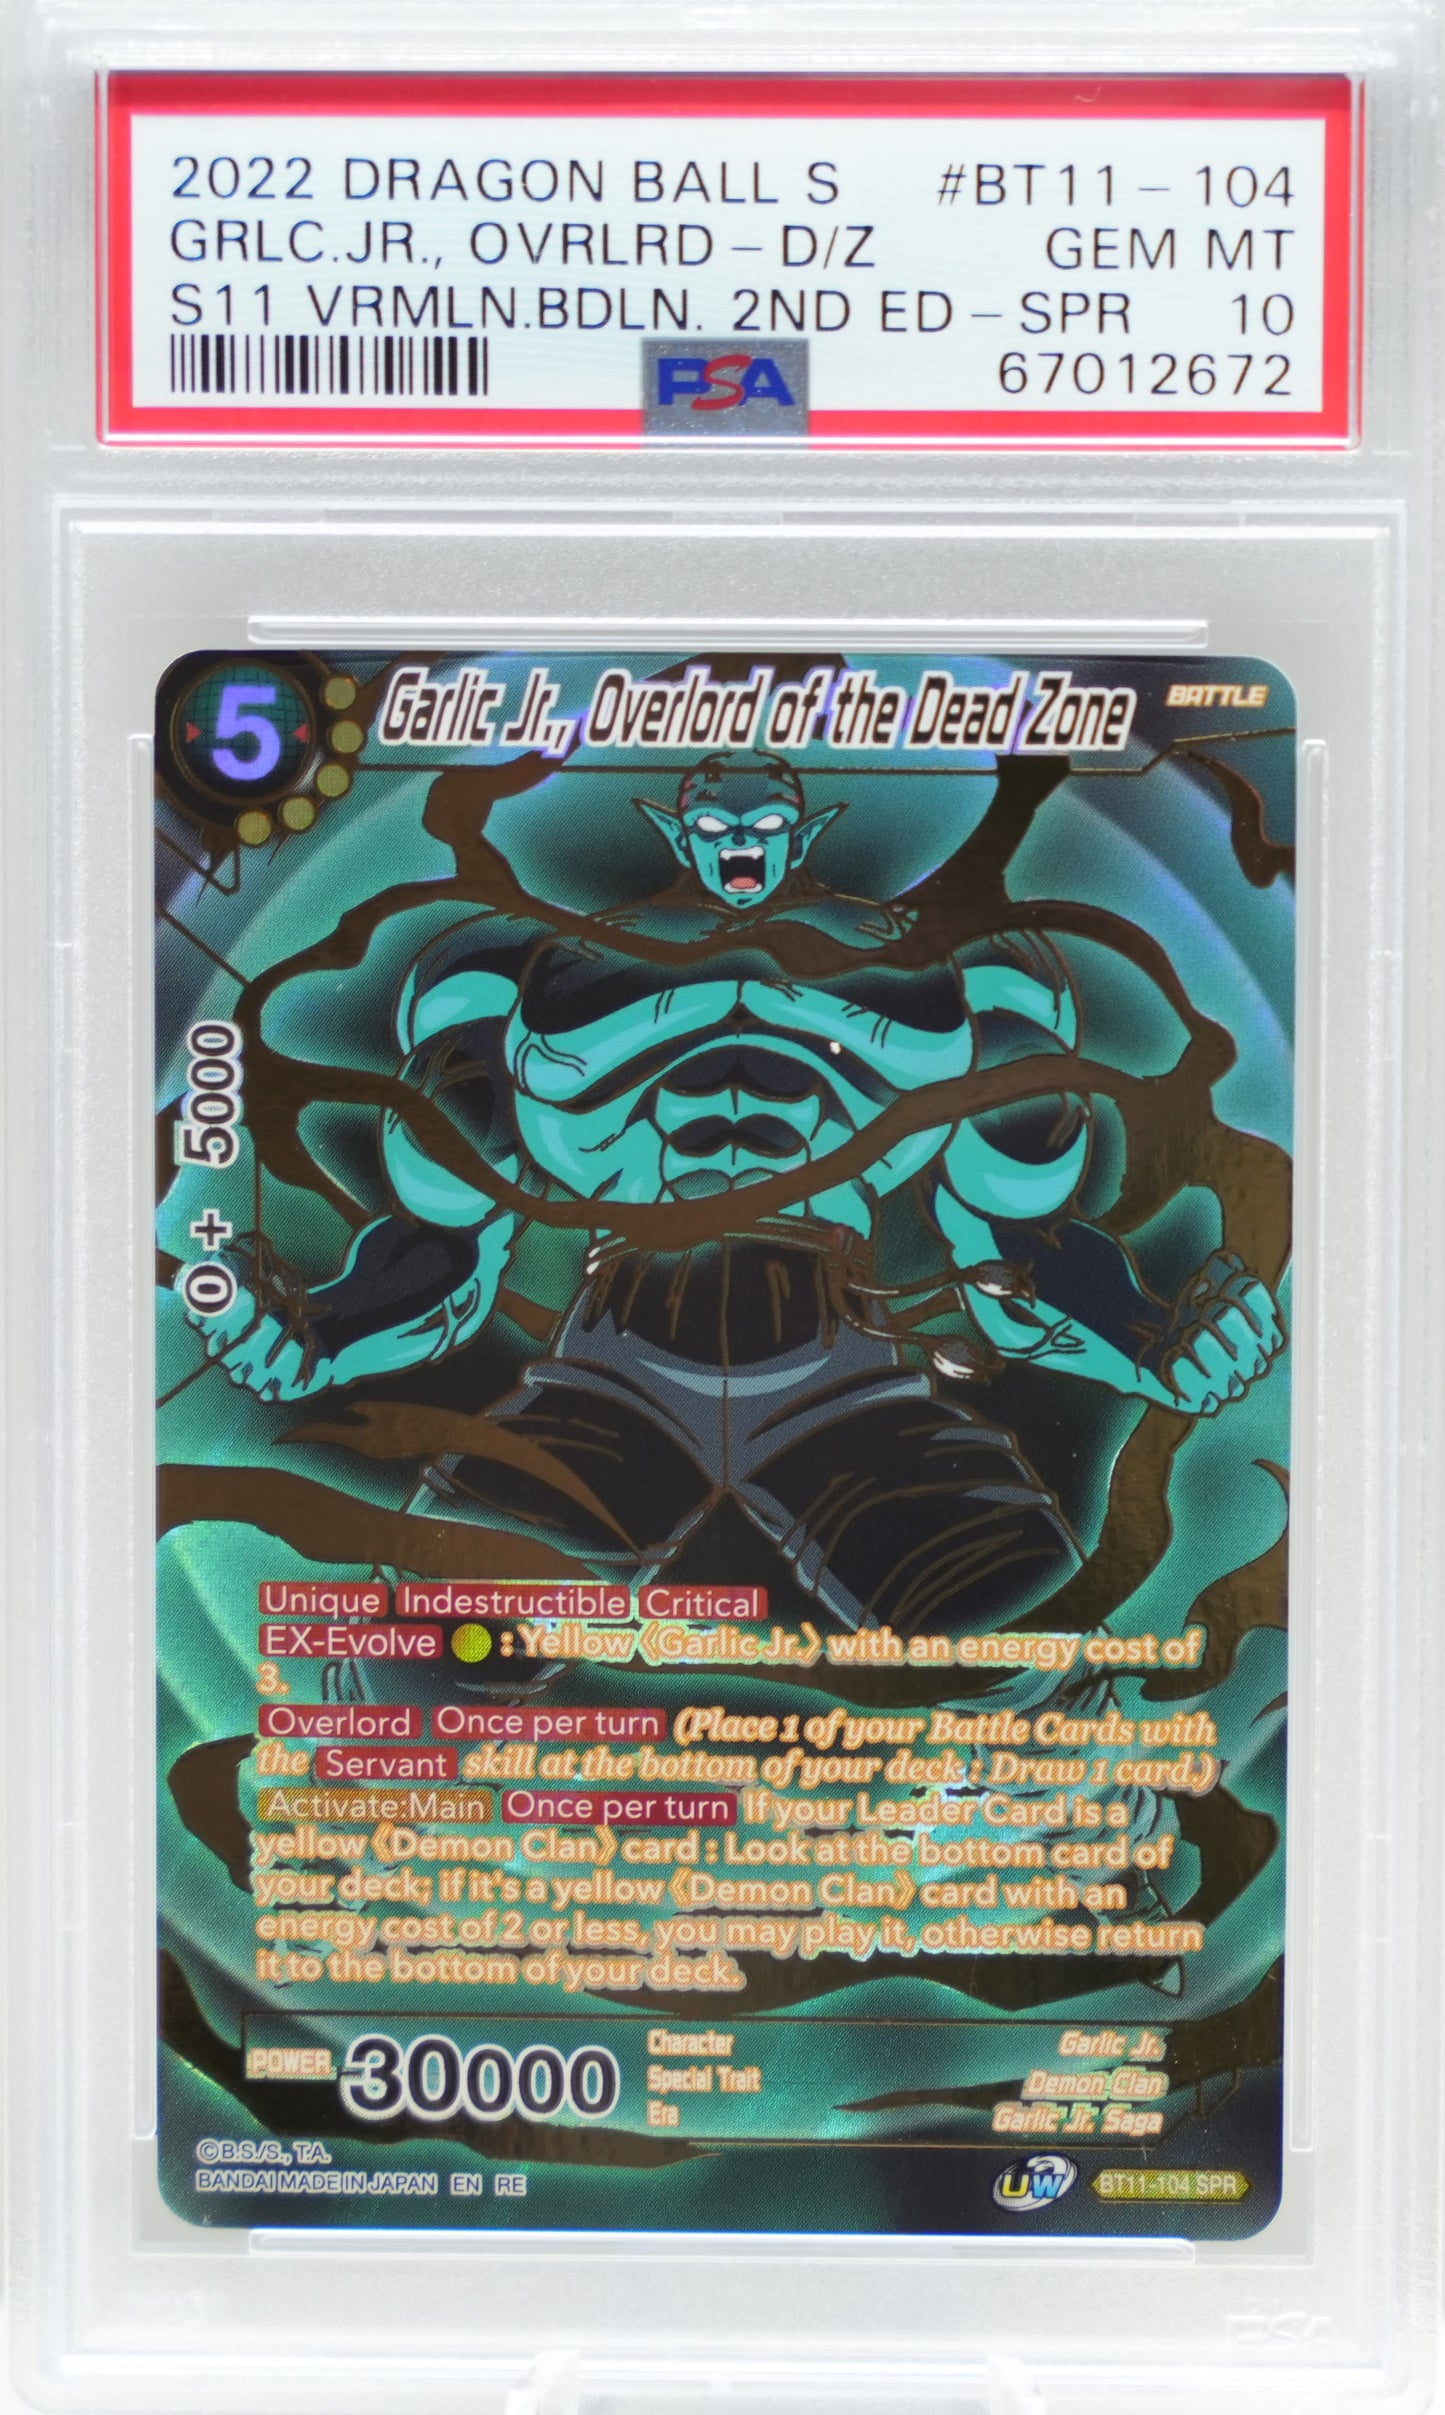 PSA 10: 2022 Dragon Ball Super Series 11 Vermilion Bloodline 2nd Edition BT11-104 Garlic Jr., Overlord of the Dead Zone Special Rare